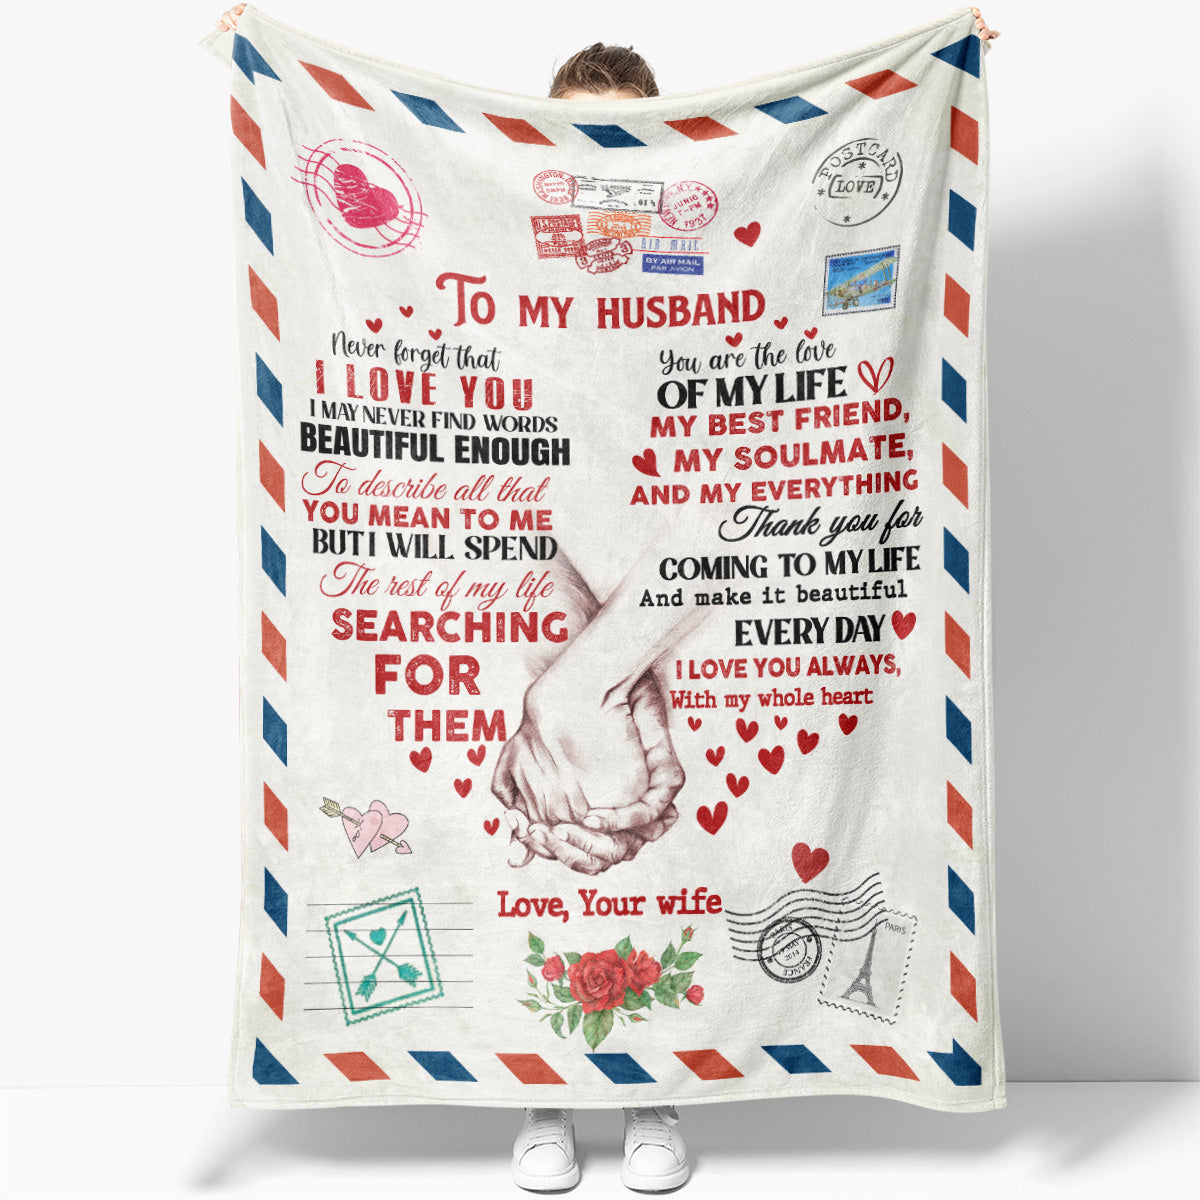 Romantic Love Letter Blanket for Husband, Thank You for Coming to My Life  Blanket for Him, Anniversary Christmas Gift For Husband, Gifts For Men -  Sweet Family Gift